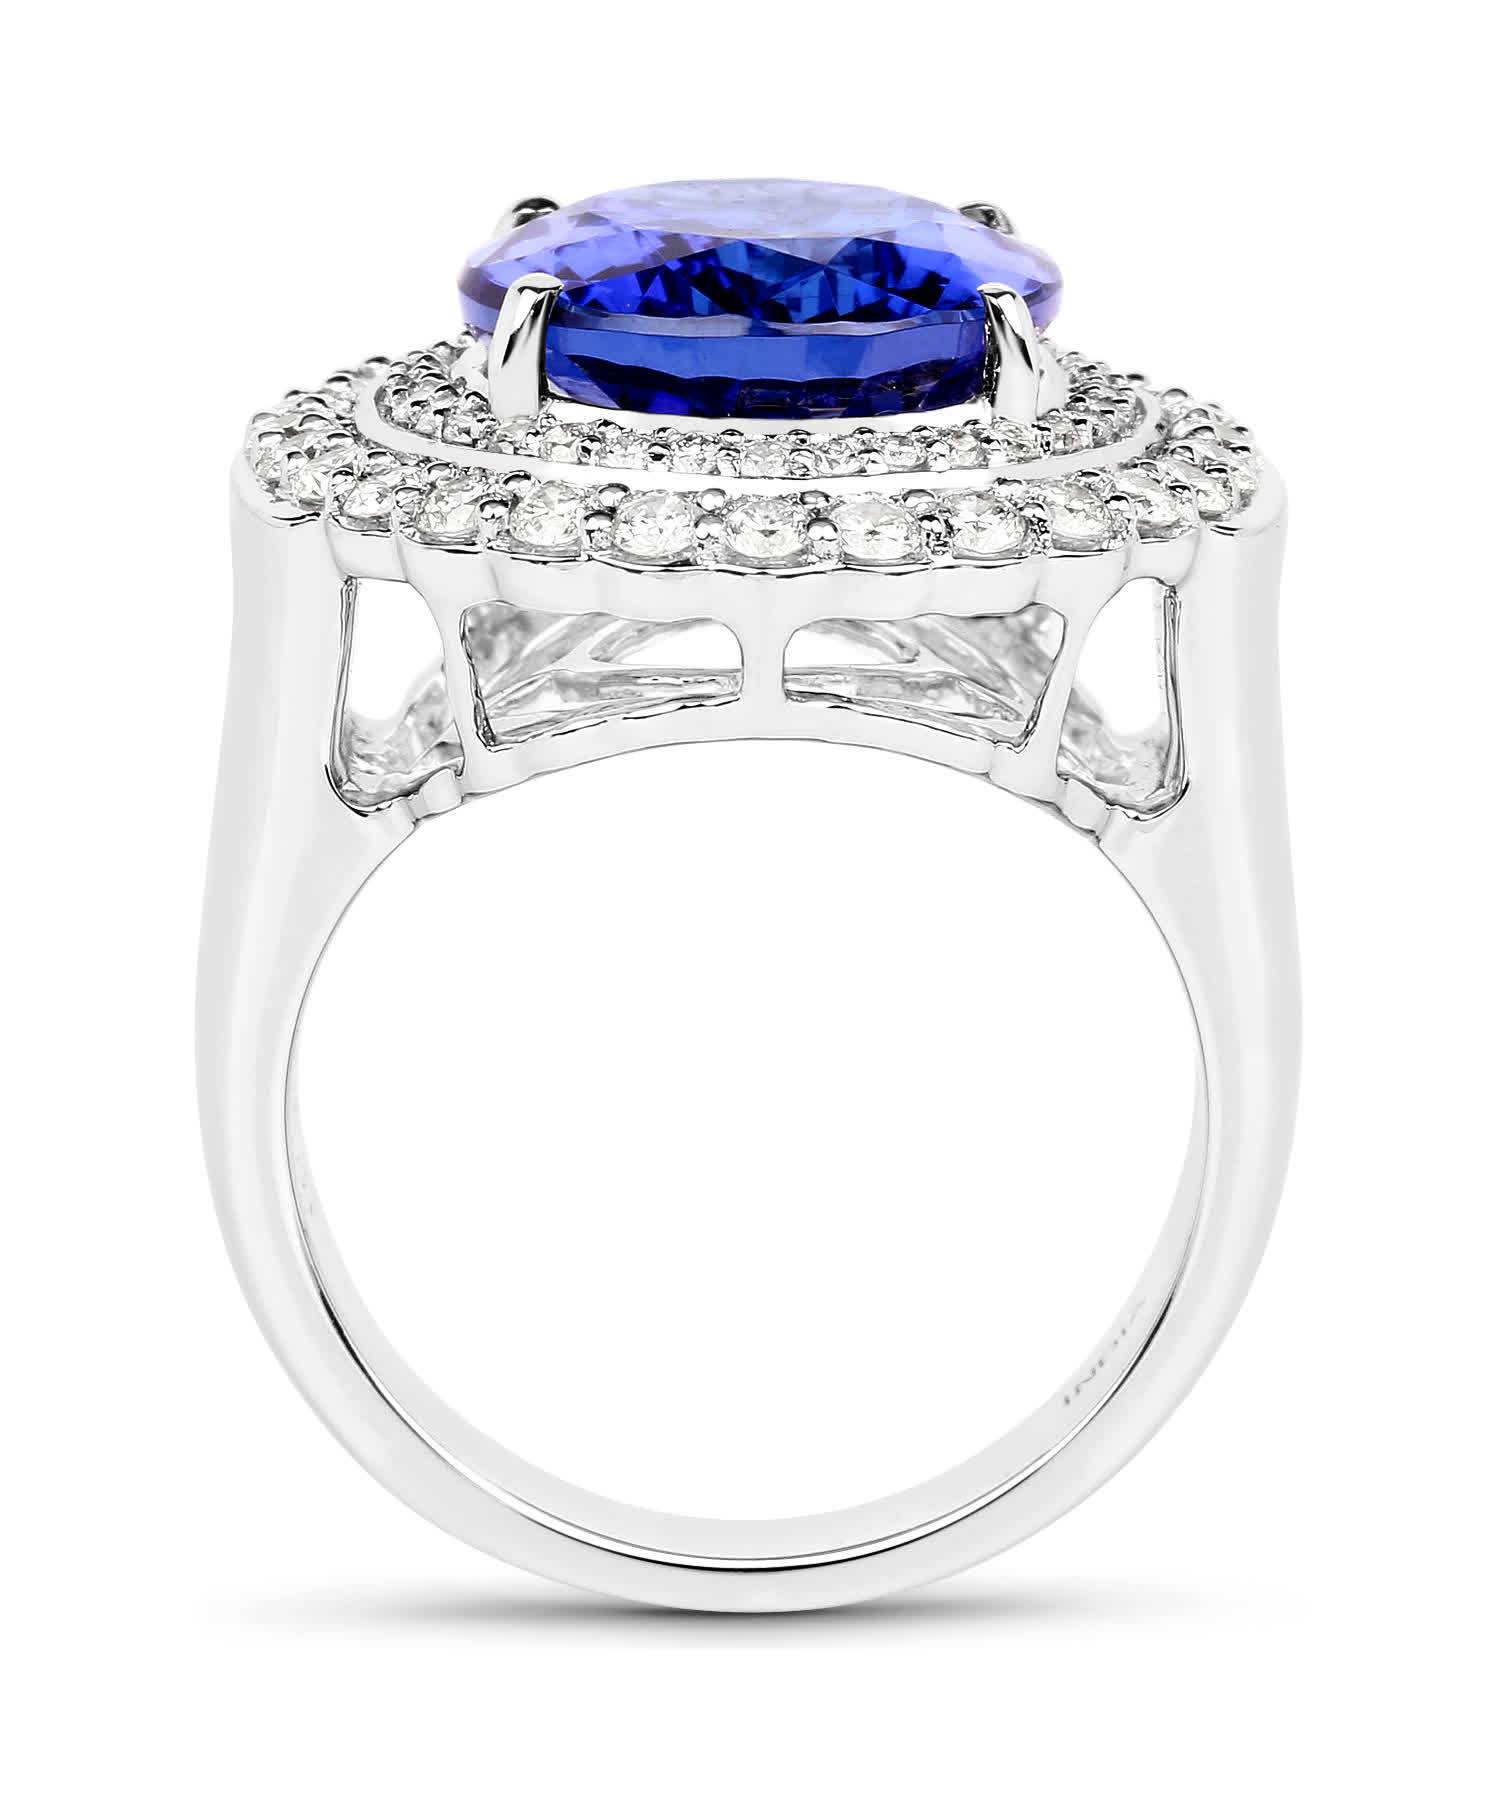 10.79ctw Natural Superior Tanzanite and Diamond 18k Gold Double Halo Cocktail Ring View 2